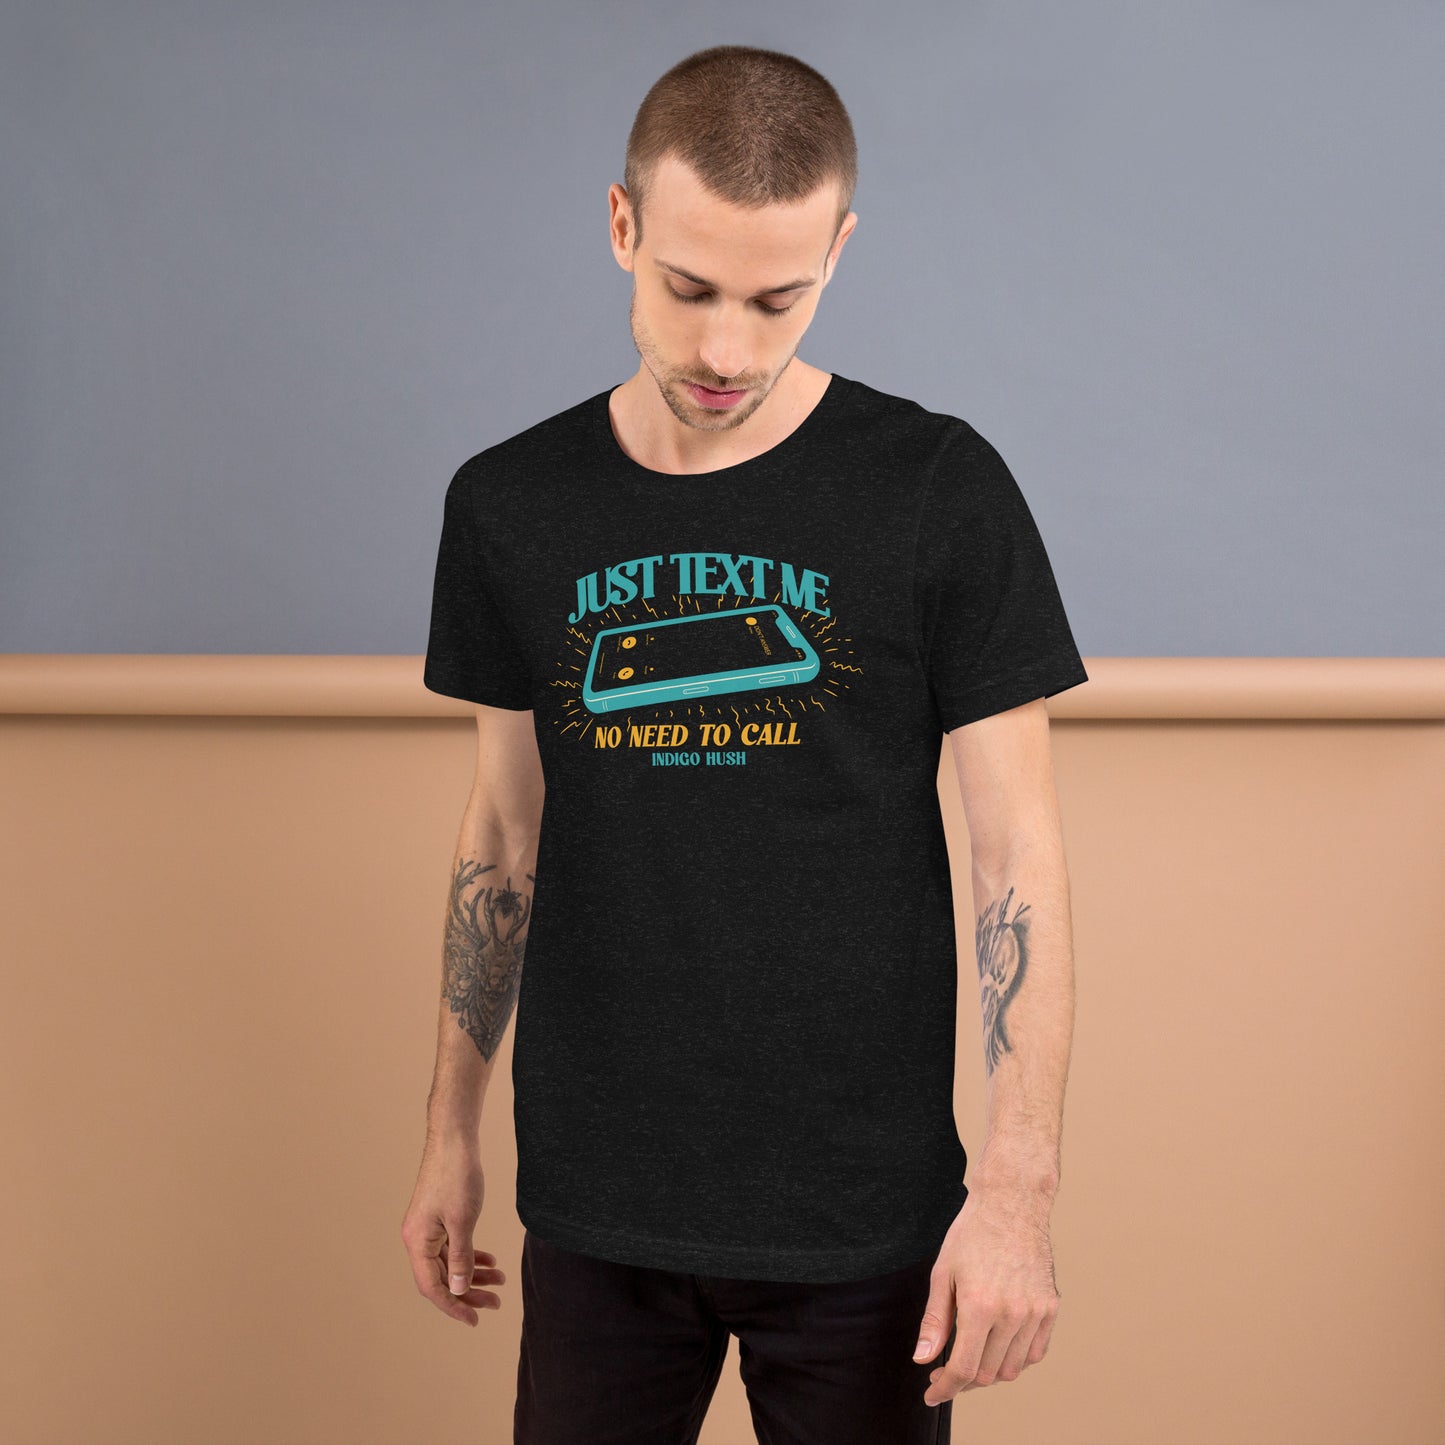 Just Text Me T-Shirt